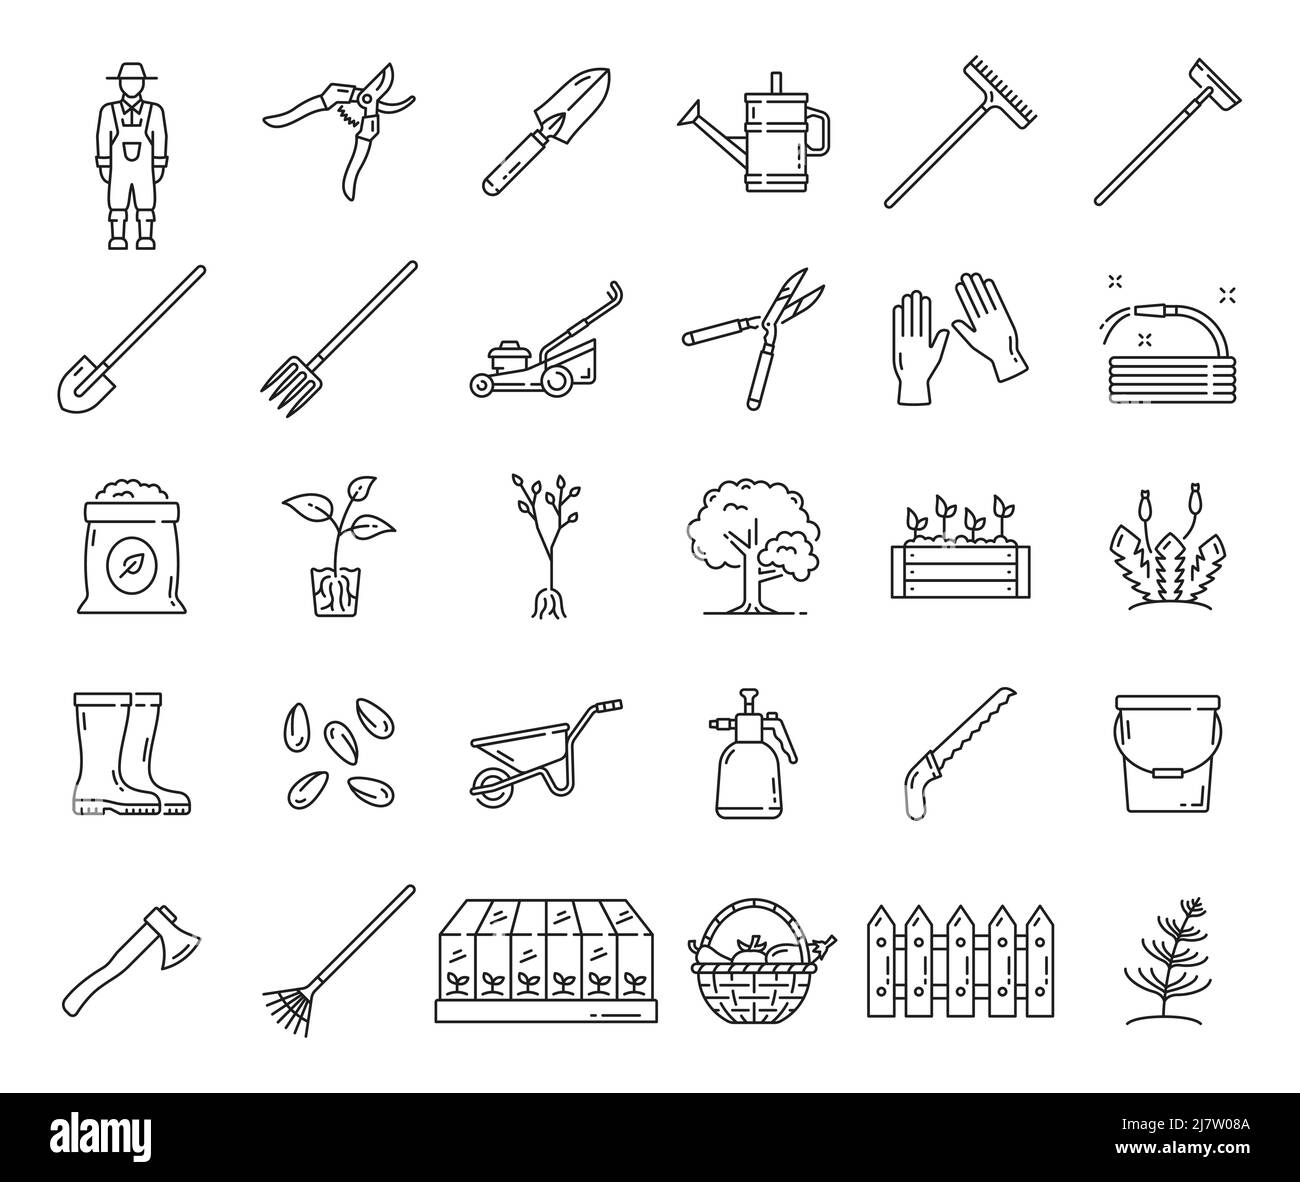 Agriculture farming and gardening, farmer tools icons, vector farm equipment. Line icons of garden rake and spade, seeds and shovel, watering can and farm wheelbarrow with mower and seedling pruner Stock Vector